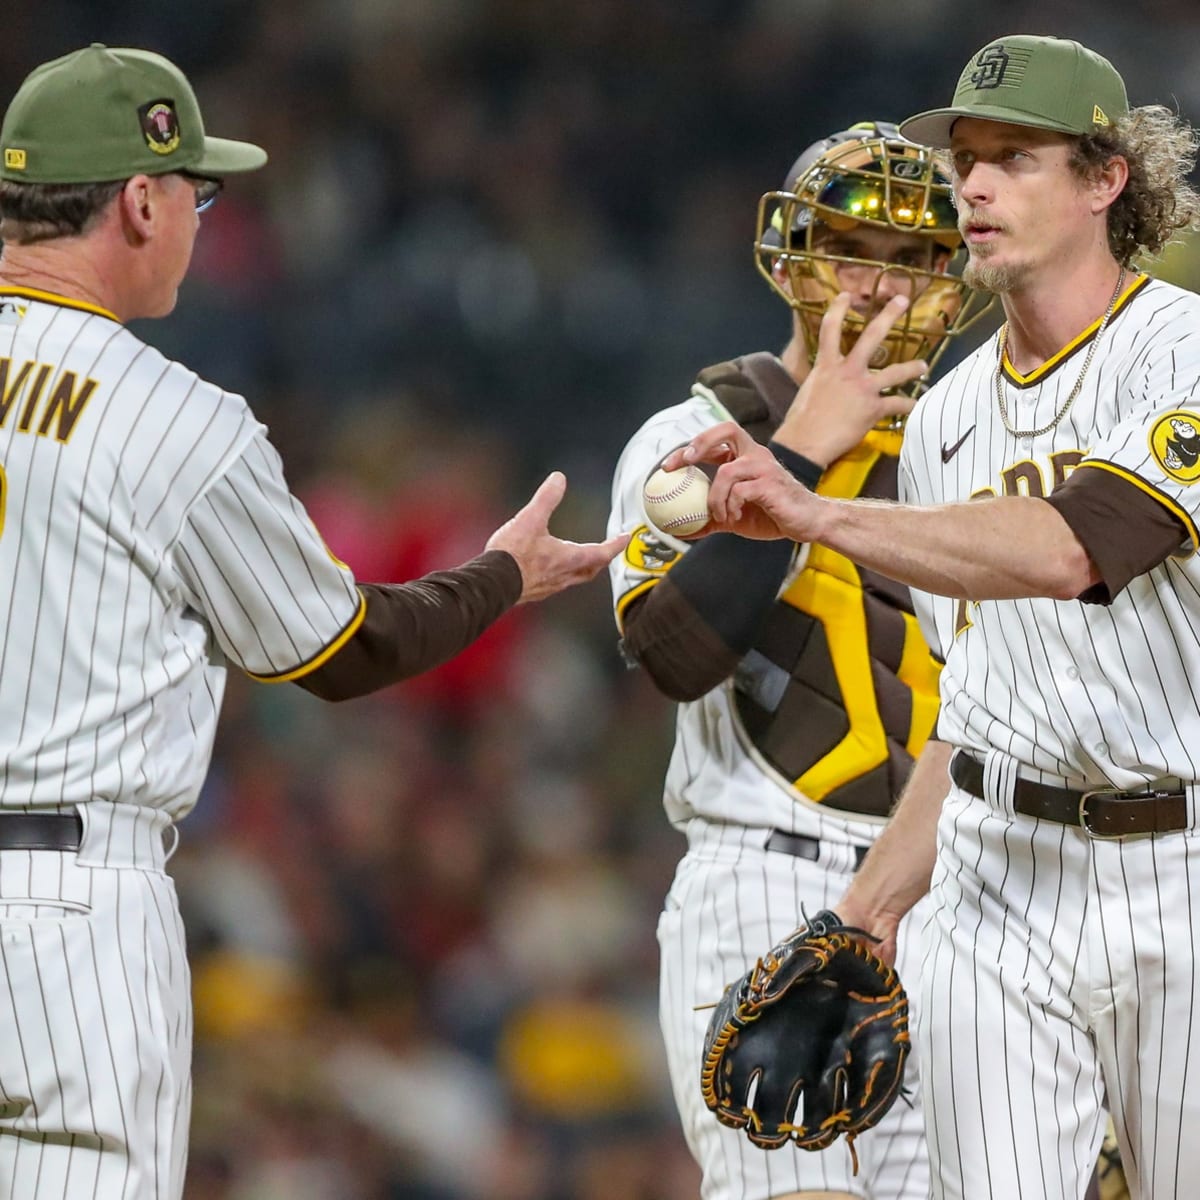 Padres Rumors: Bob Melvin's Future in San Diego Not as Clear As